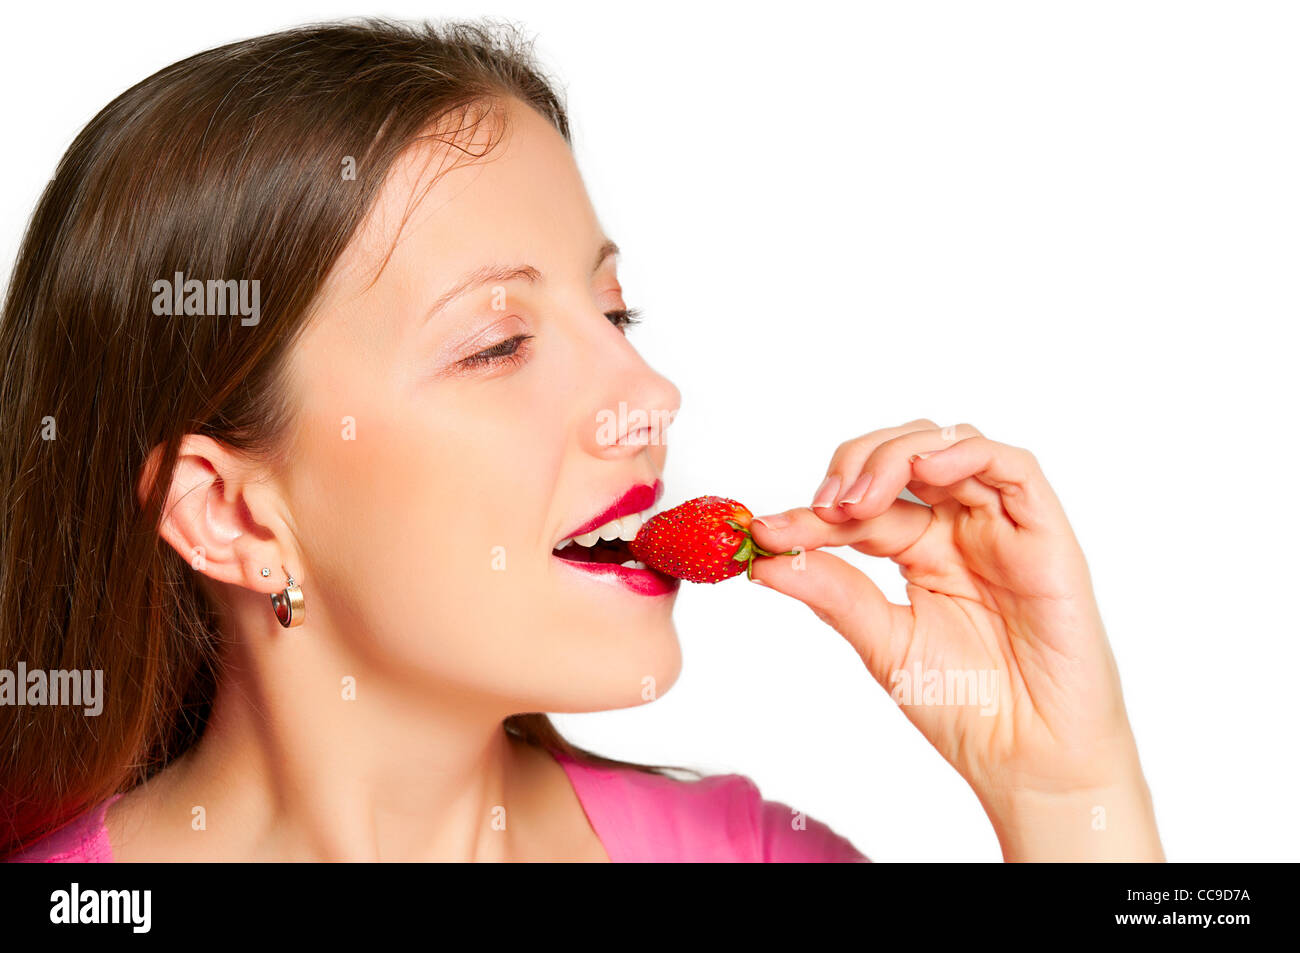 Beautiful girl takes a bite out a piece of strawberry keeps her leaves Stock Photo